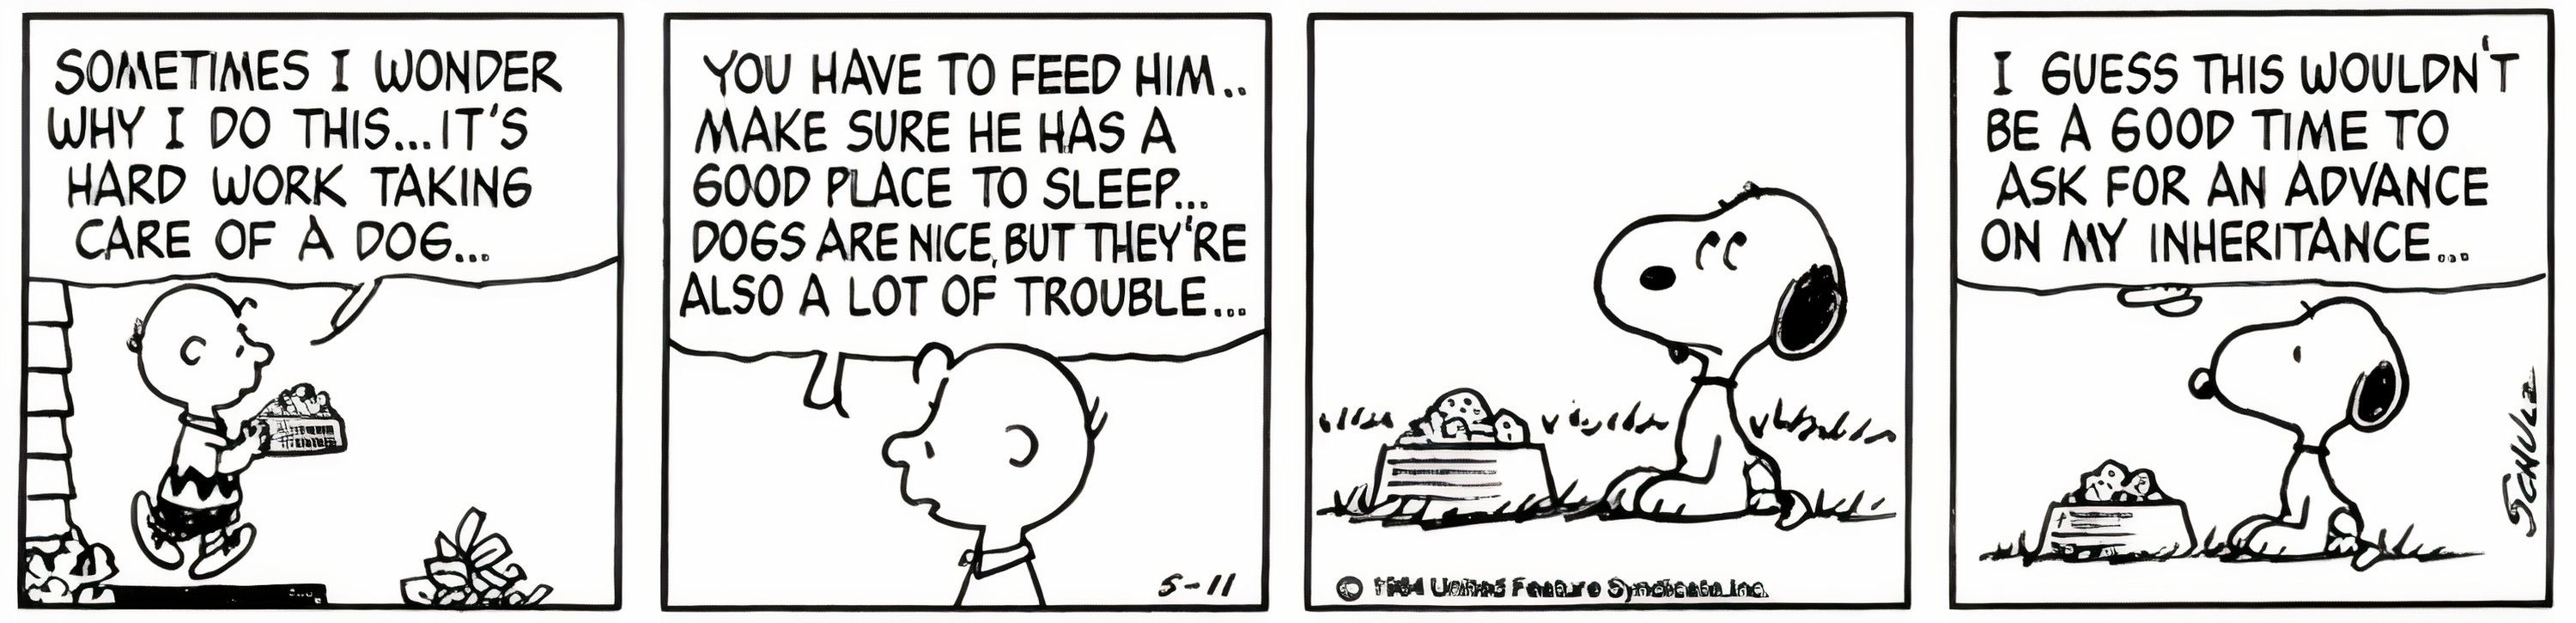 Peanuts, Snoopy considers asking for an advance on his inheritance.